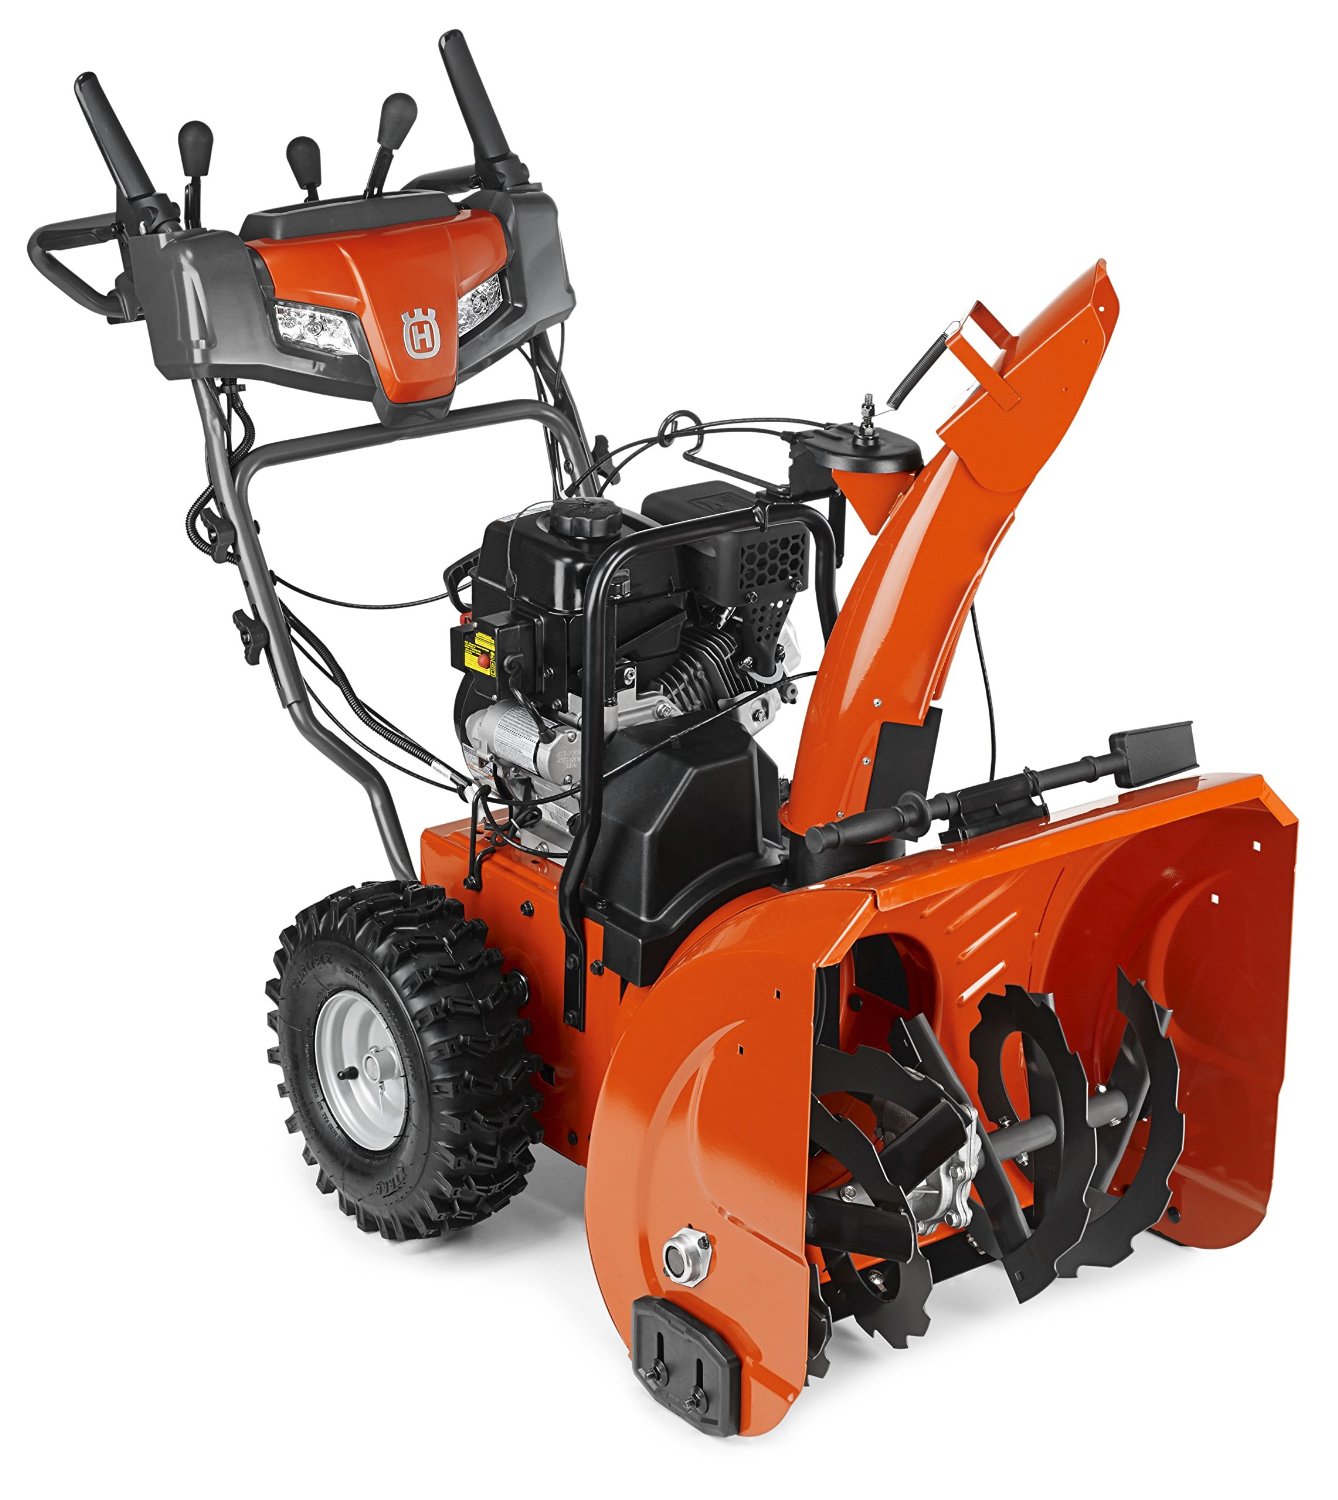 10 Best Snow Blowers For Sale Review for 2019 Jerusalem Post